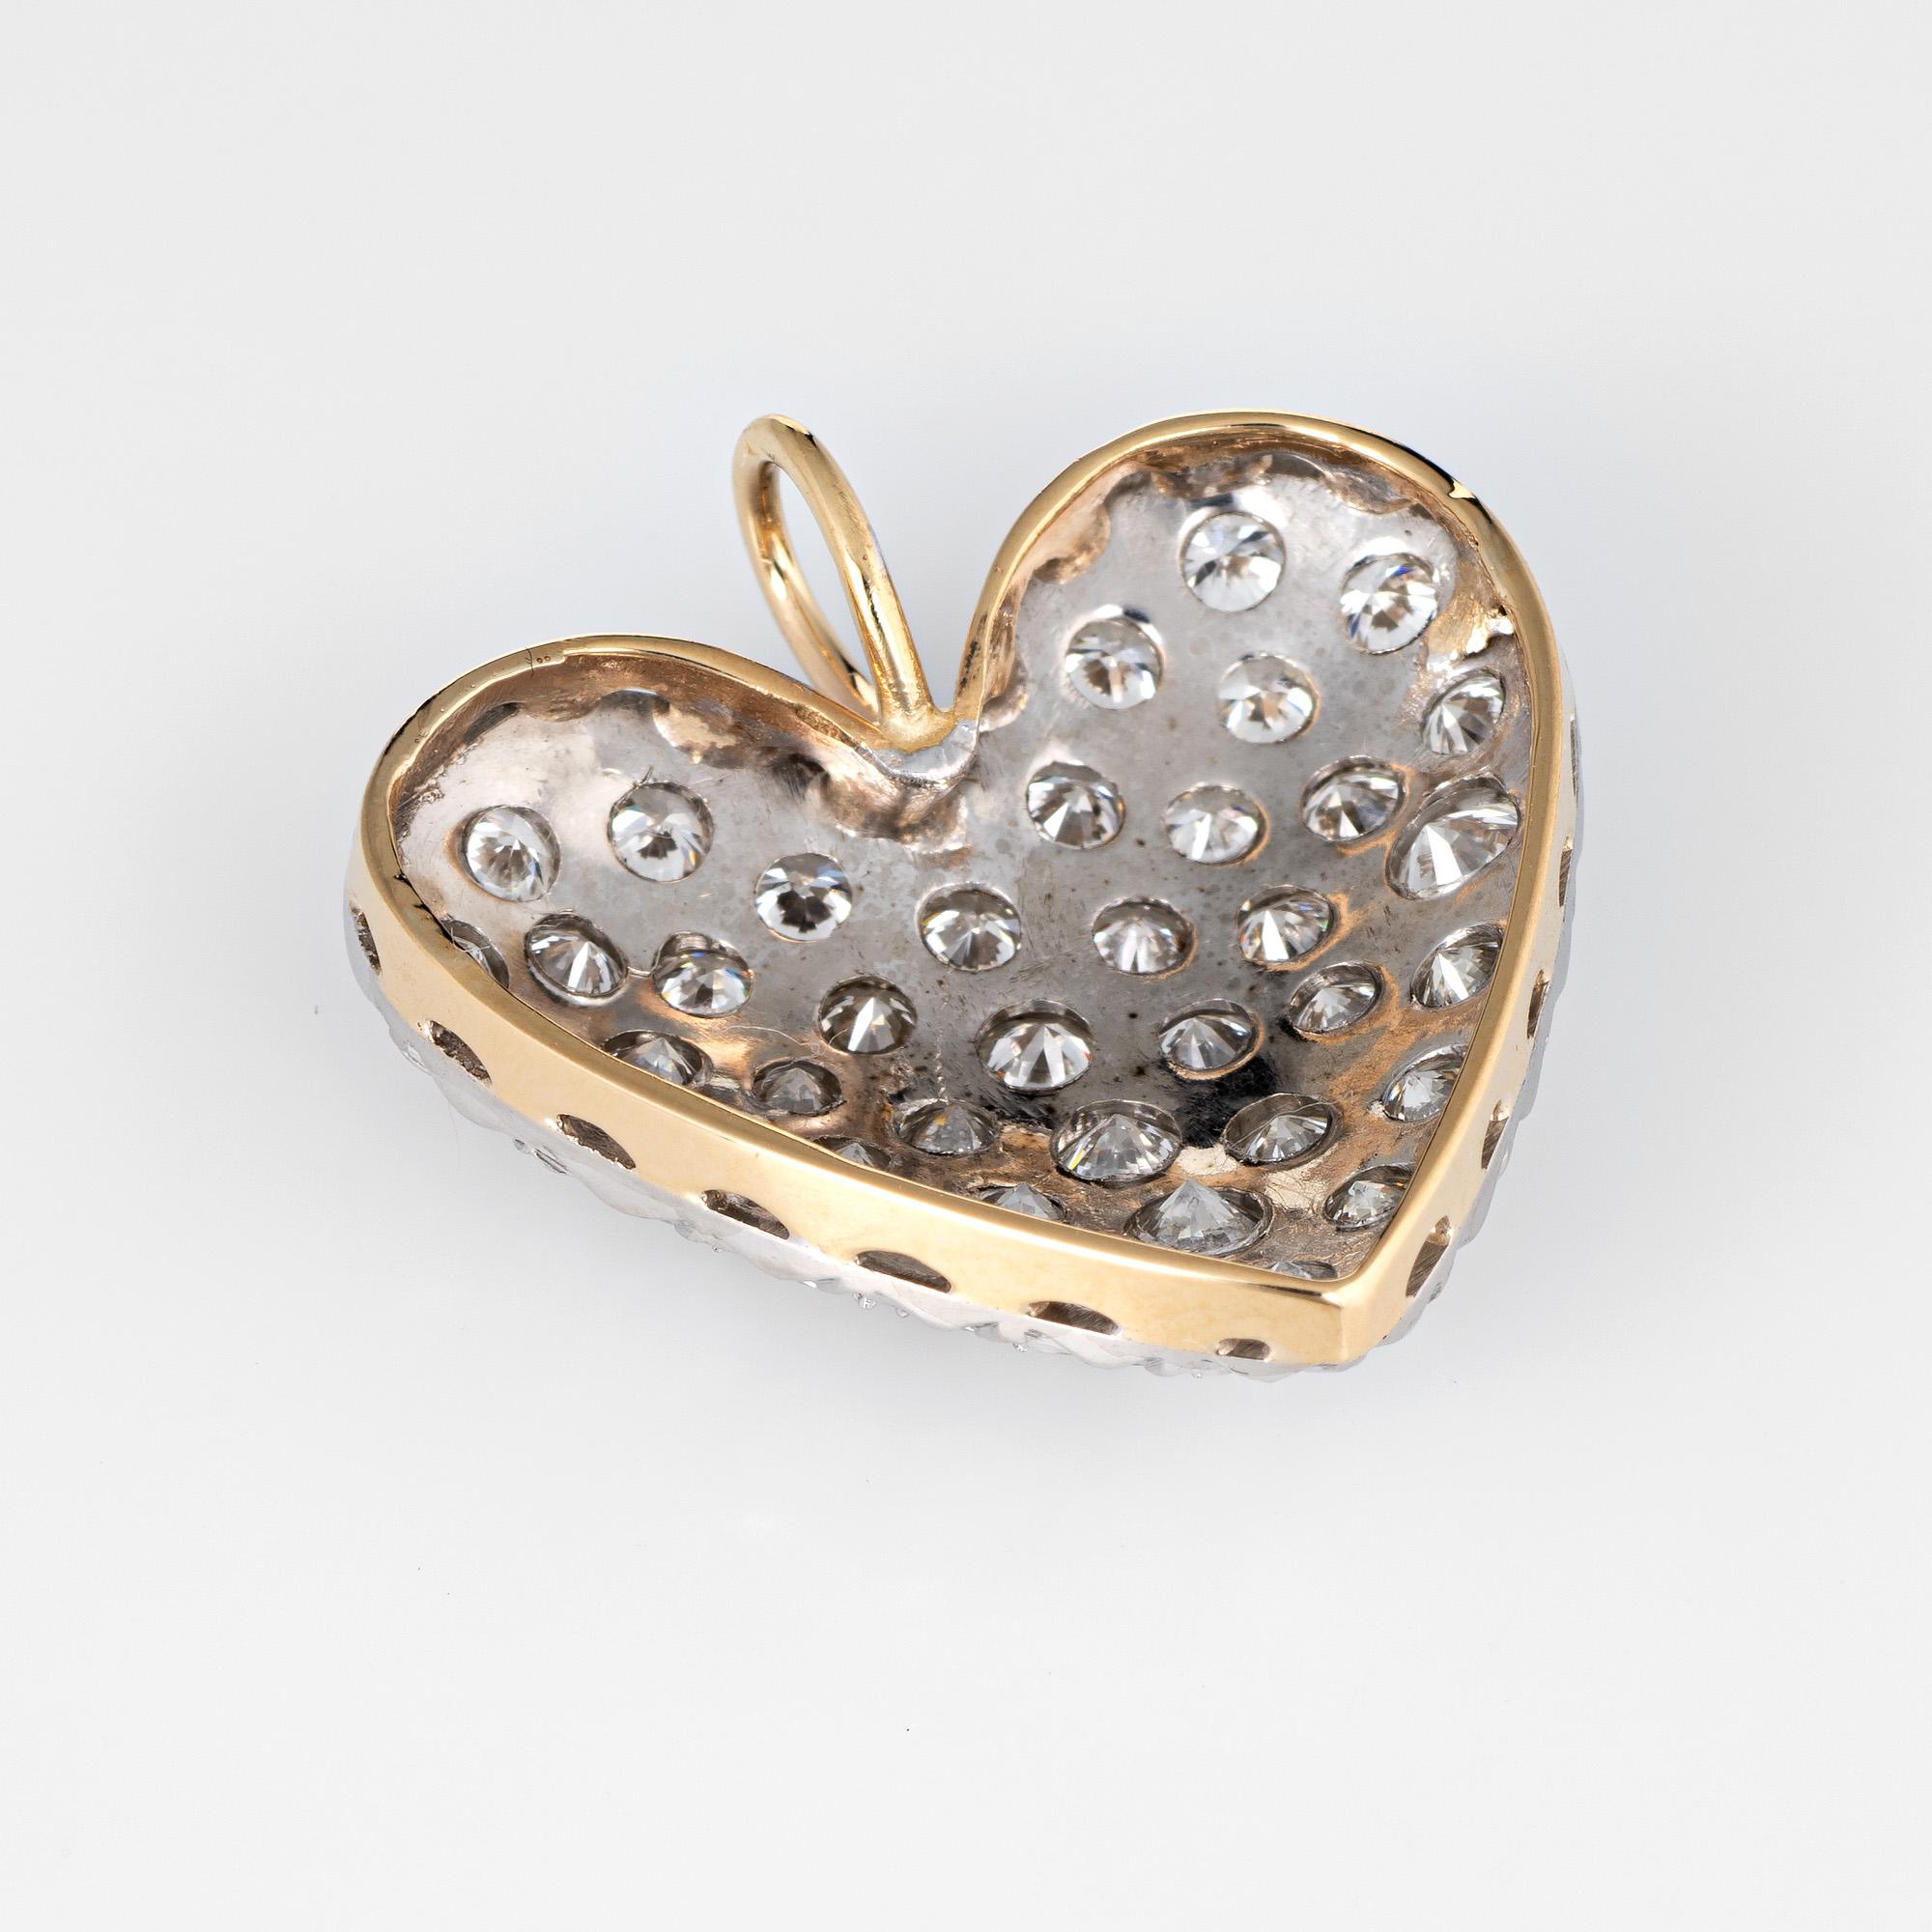 Finely detailed vintage pave diamond heart pendant crafted in 14k yellow & white gold.  

41 estimated 0.05 carat round brilliant cut diamonds are pave set into the heart and total an estimated 2.05 carats (estimated at G-H color and VS2 clarity).